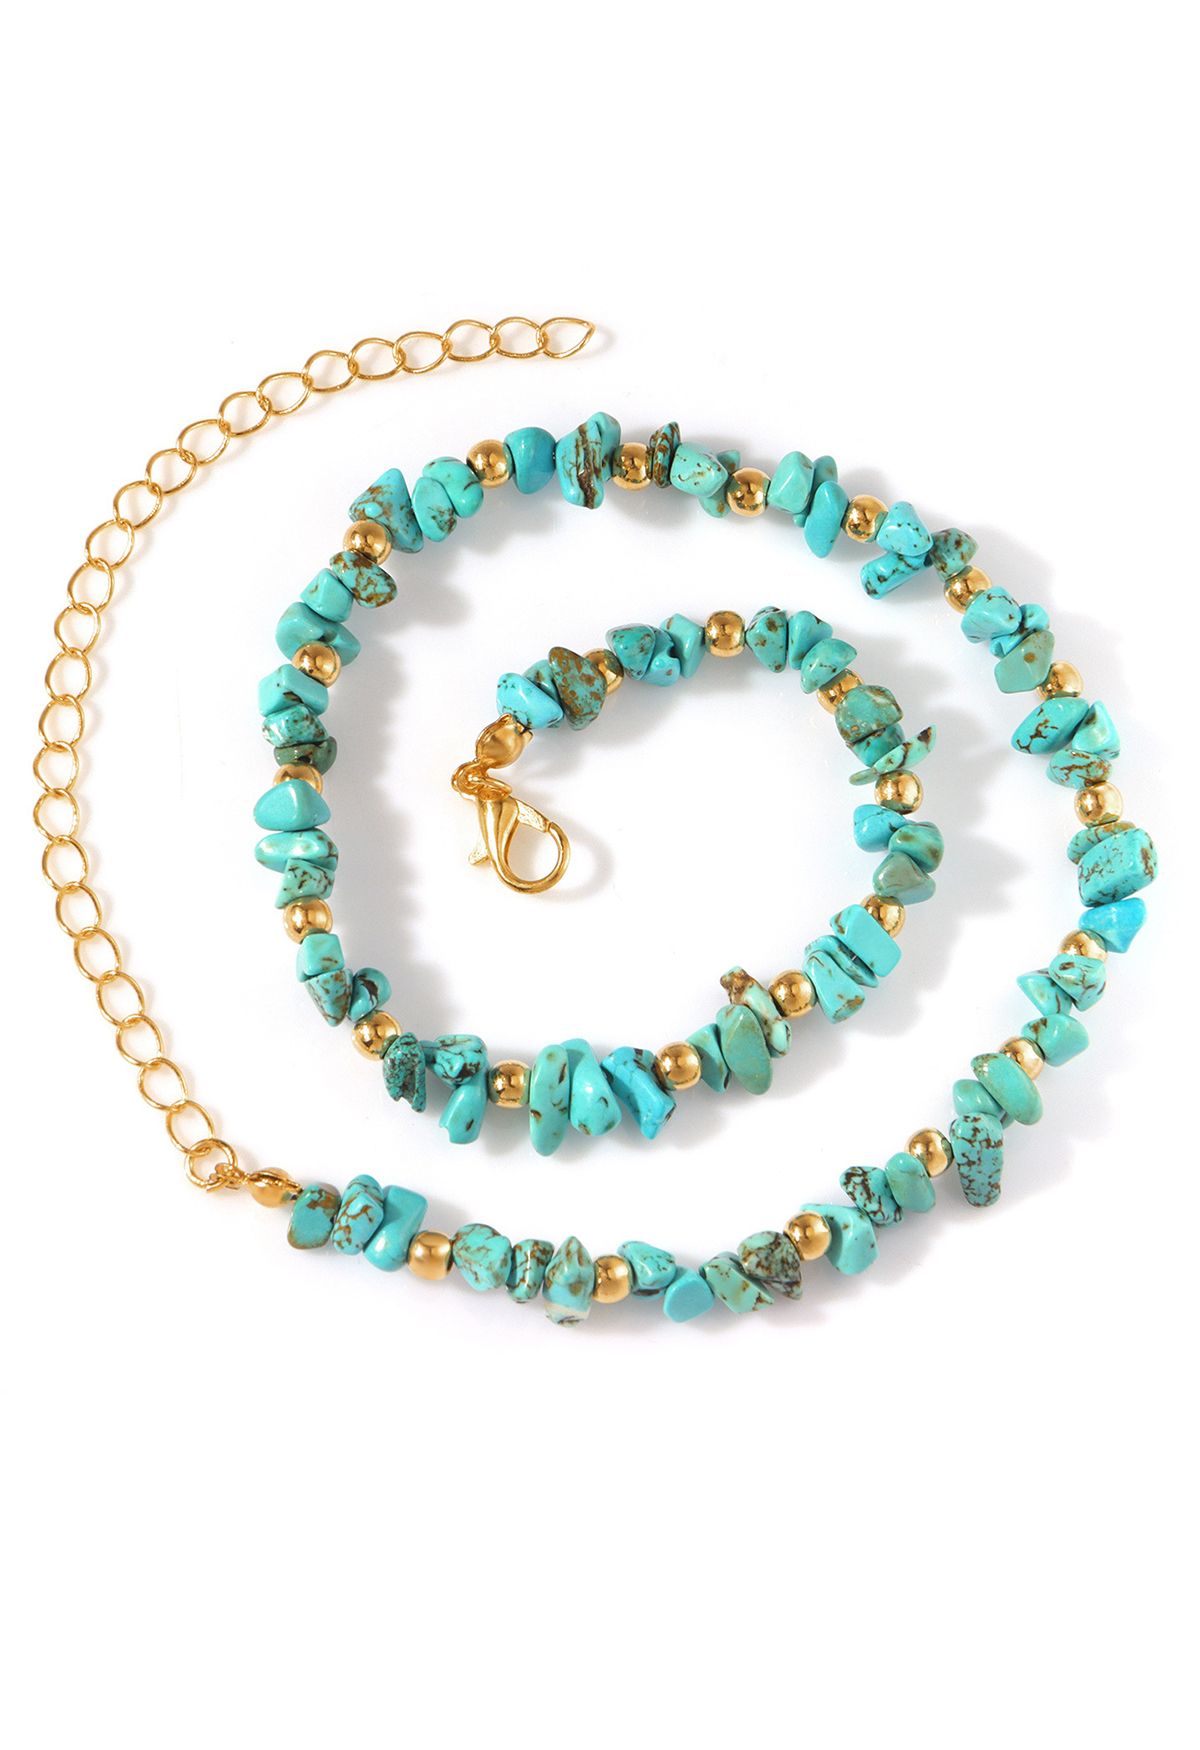 Irregular Natural Stone Necklace in Turquoise